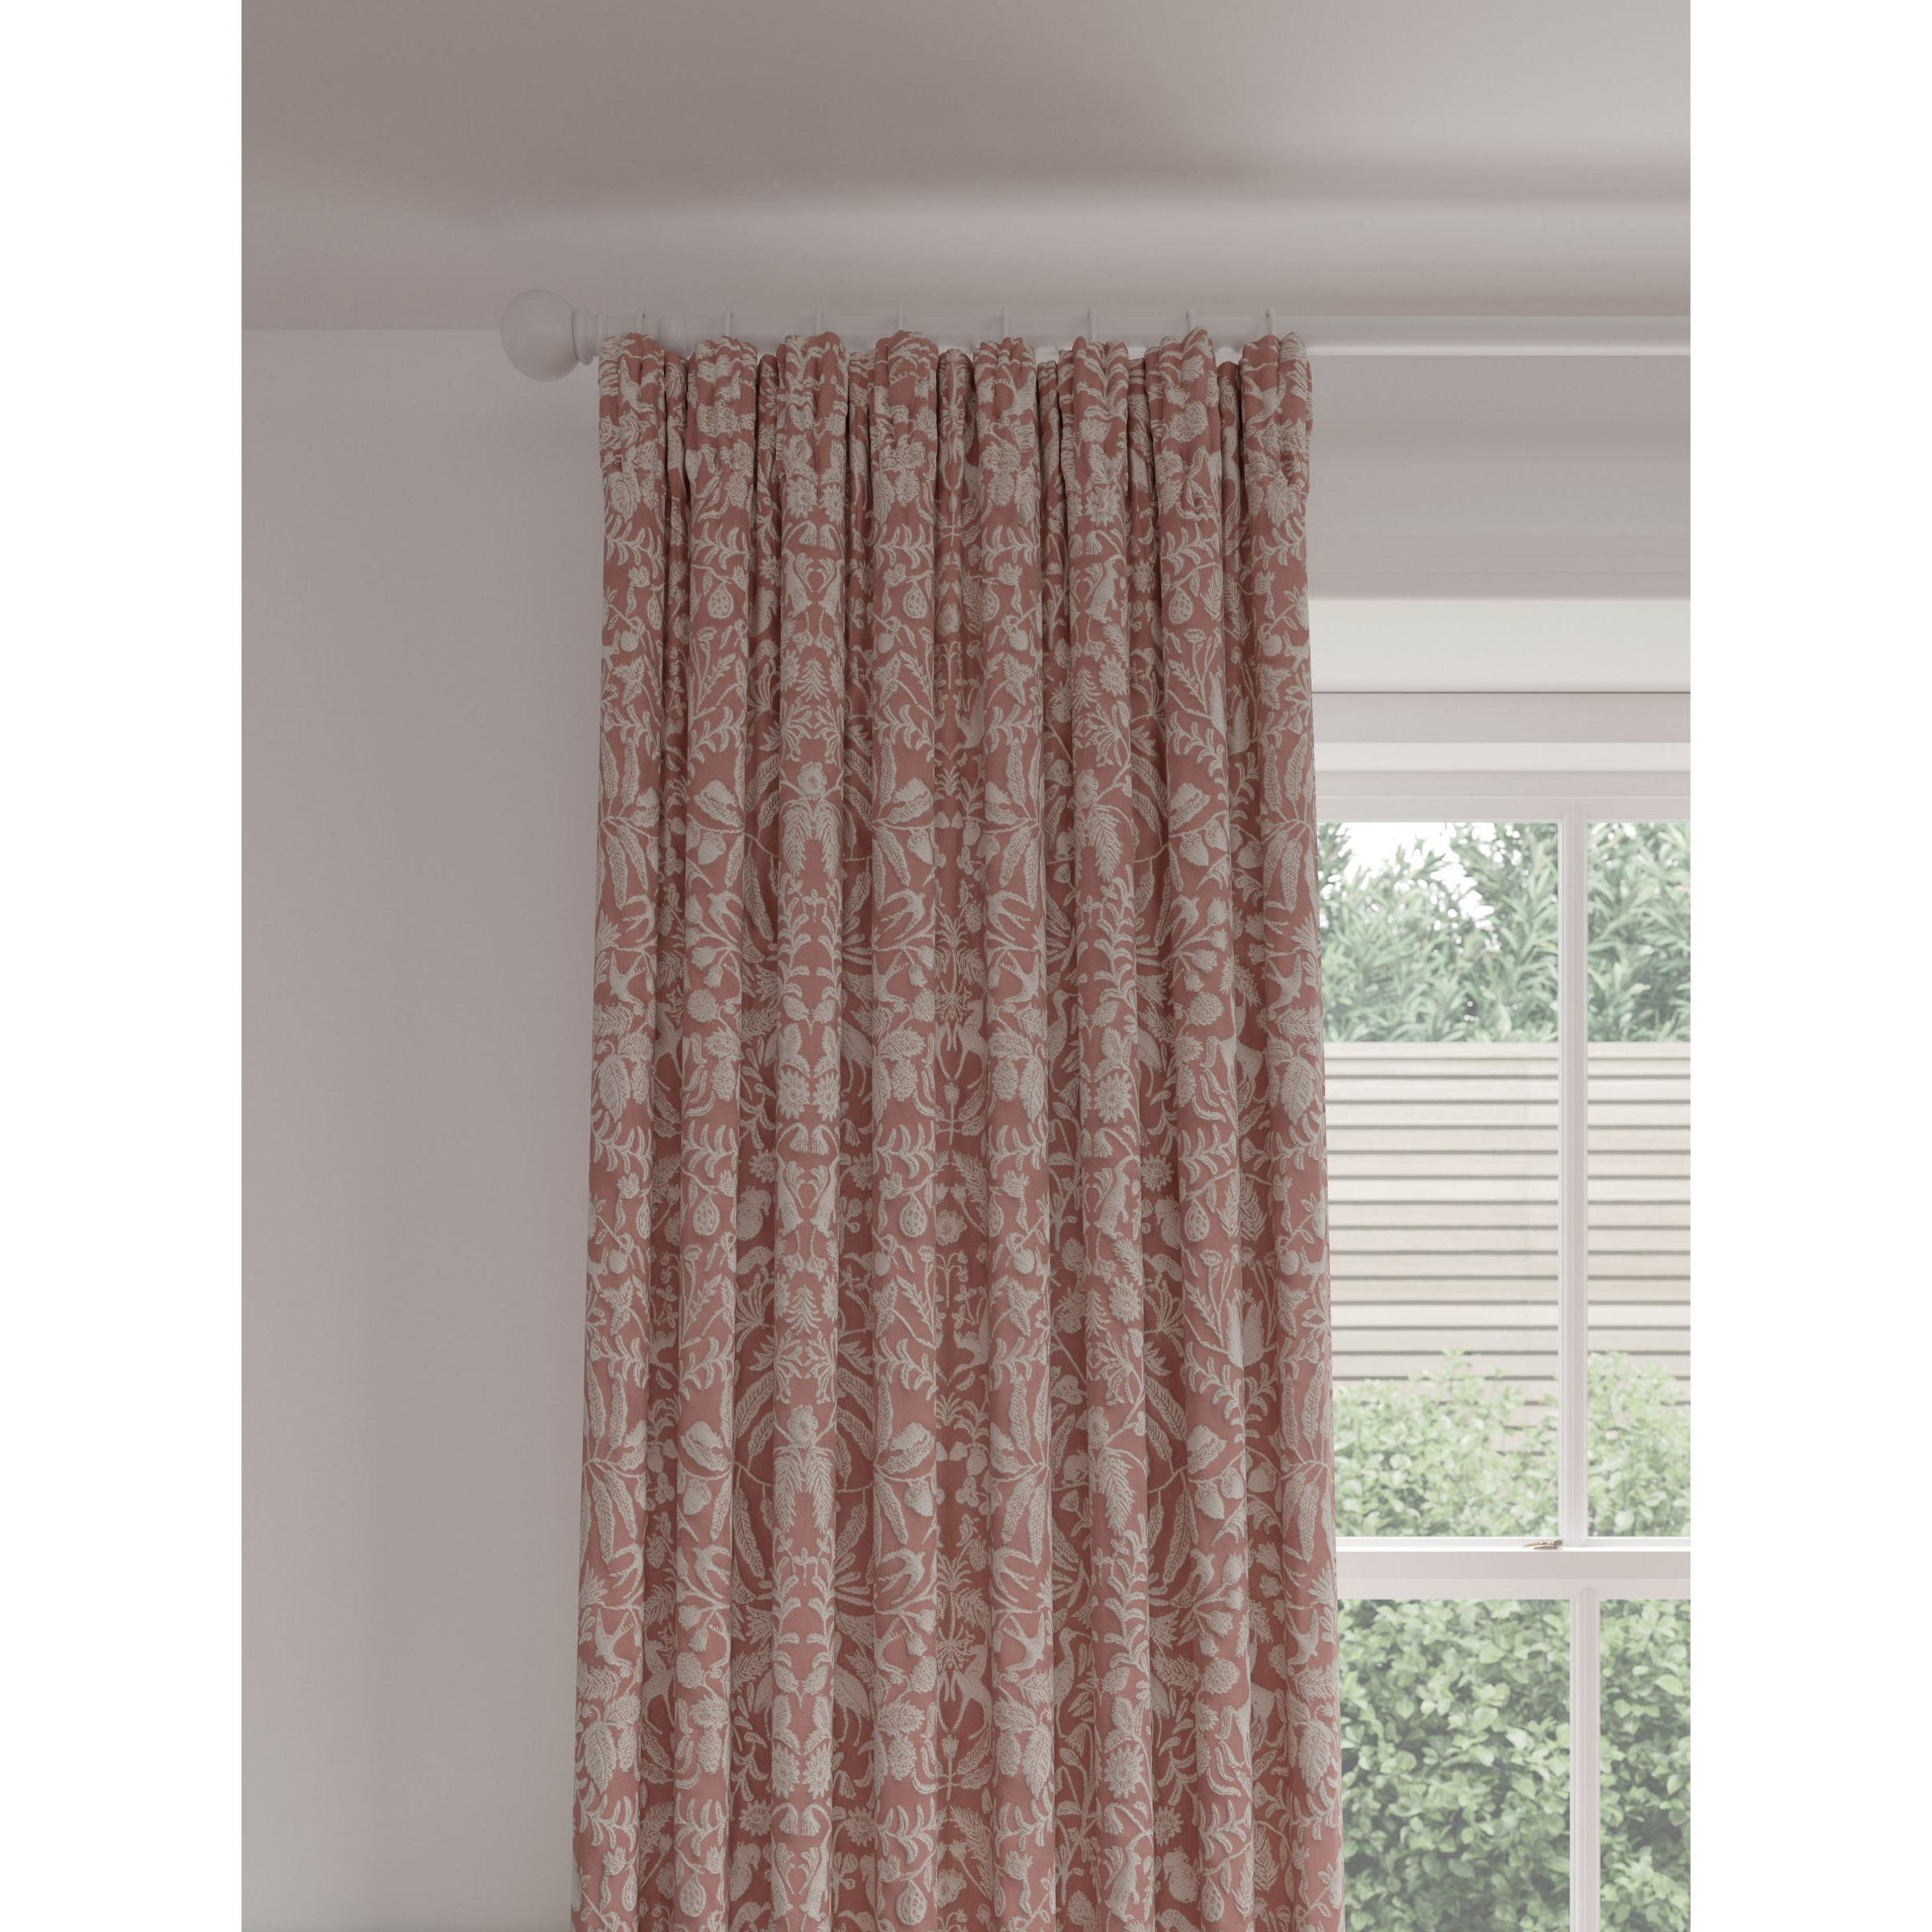 John Lewis Woodland Fable Weave Pair Lined Pencil Pleat Curtains - image 1